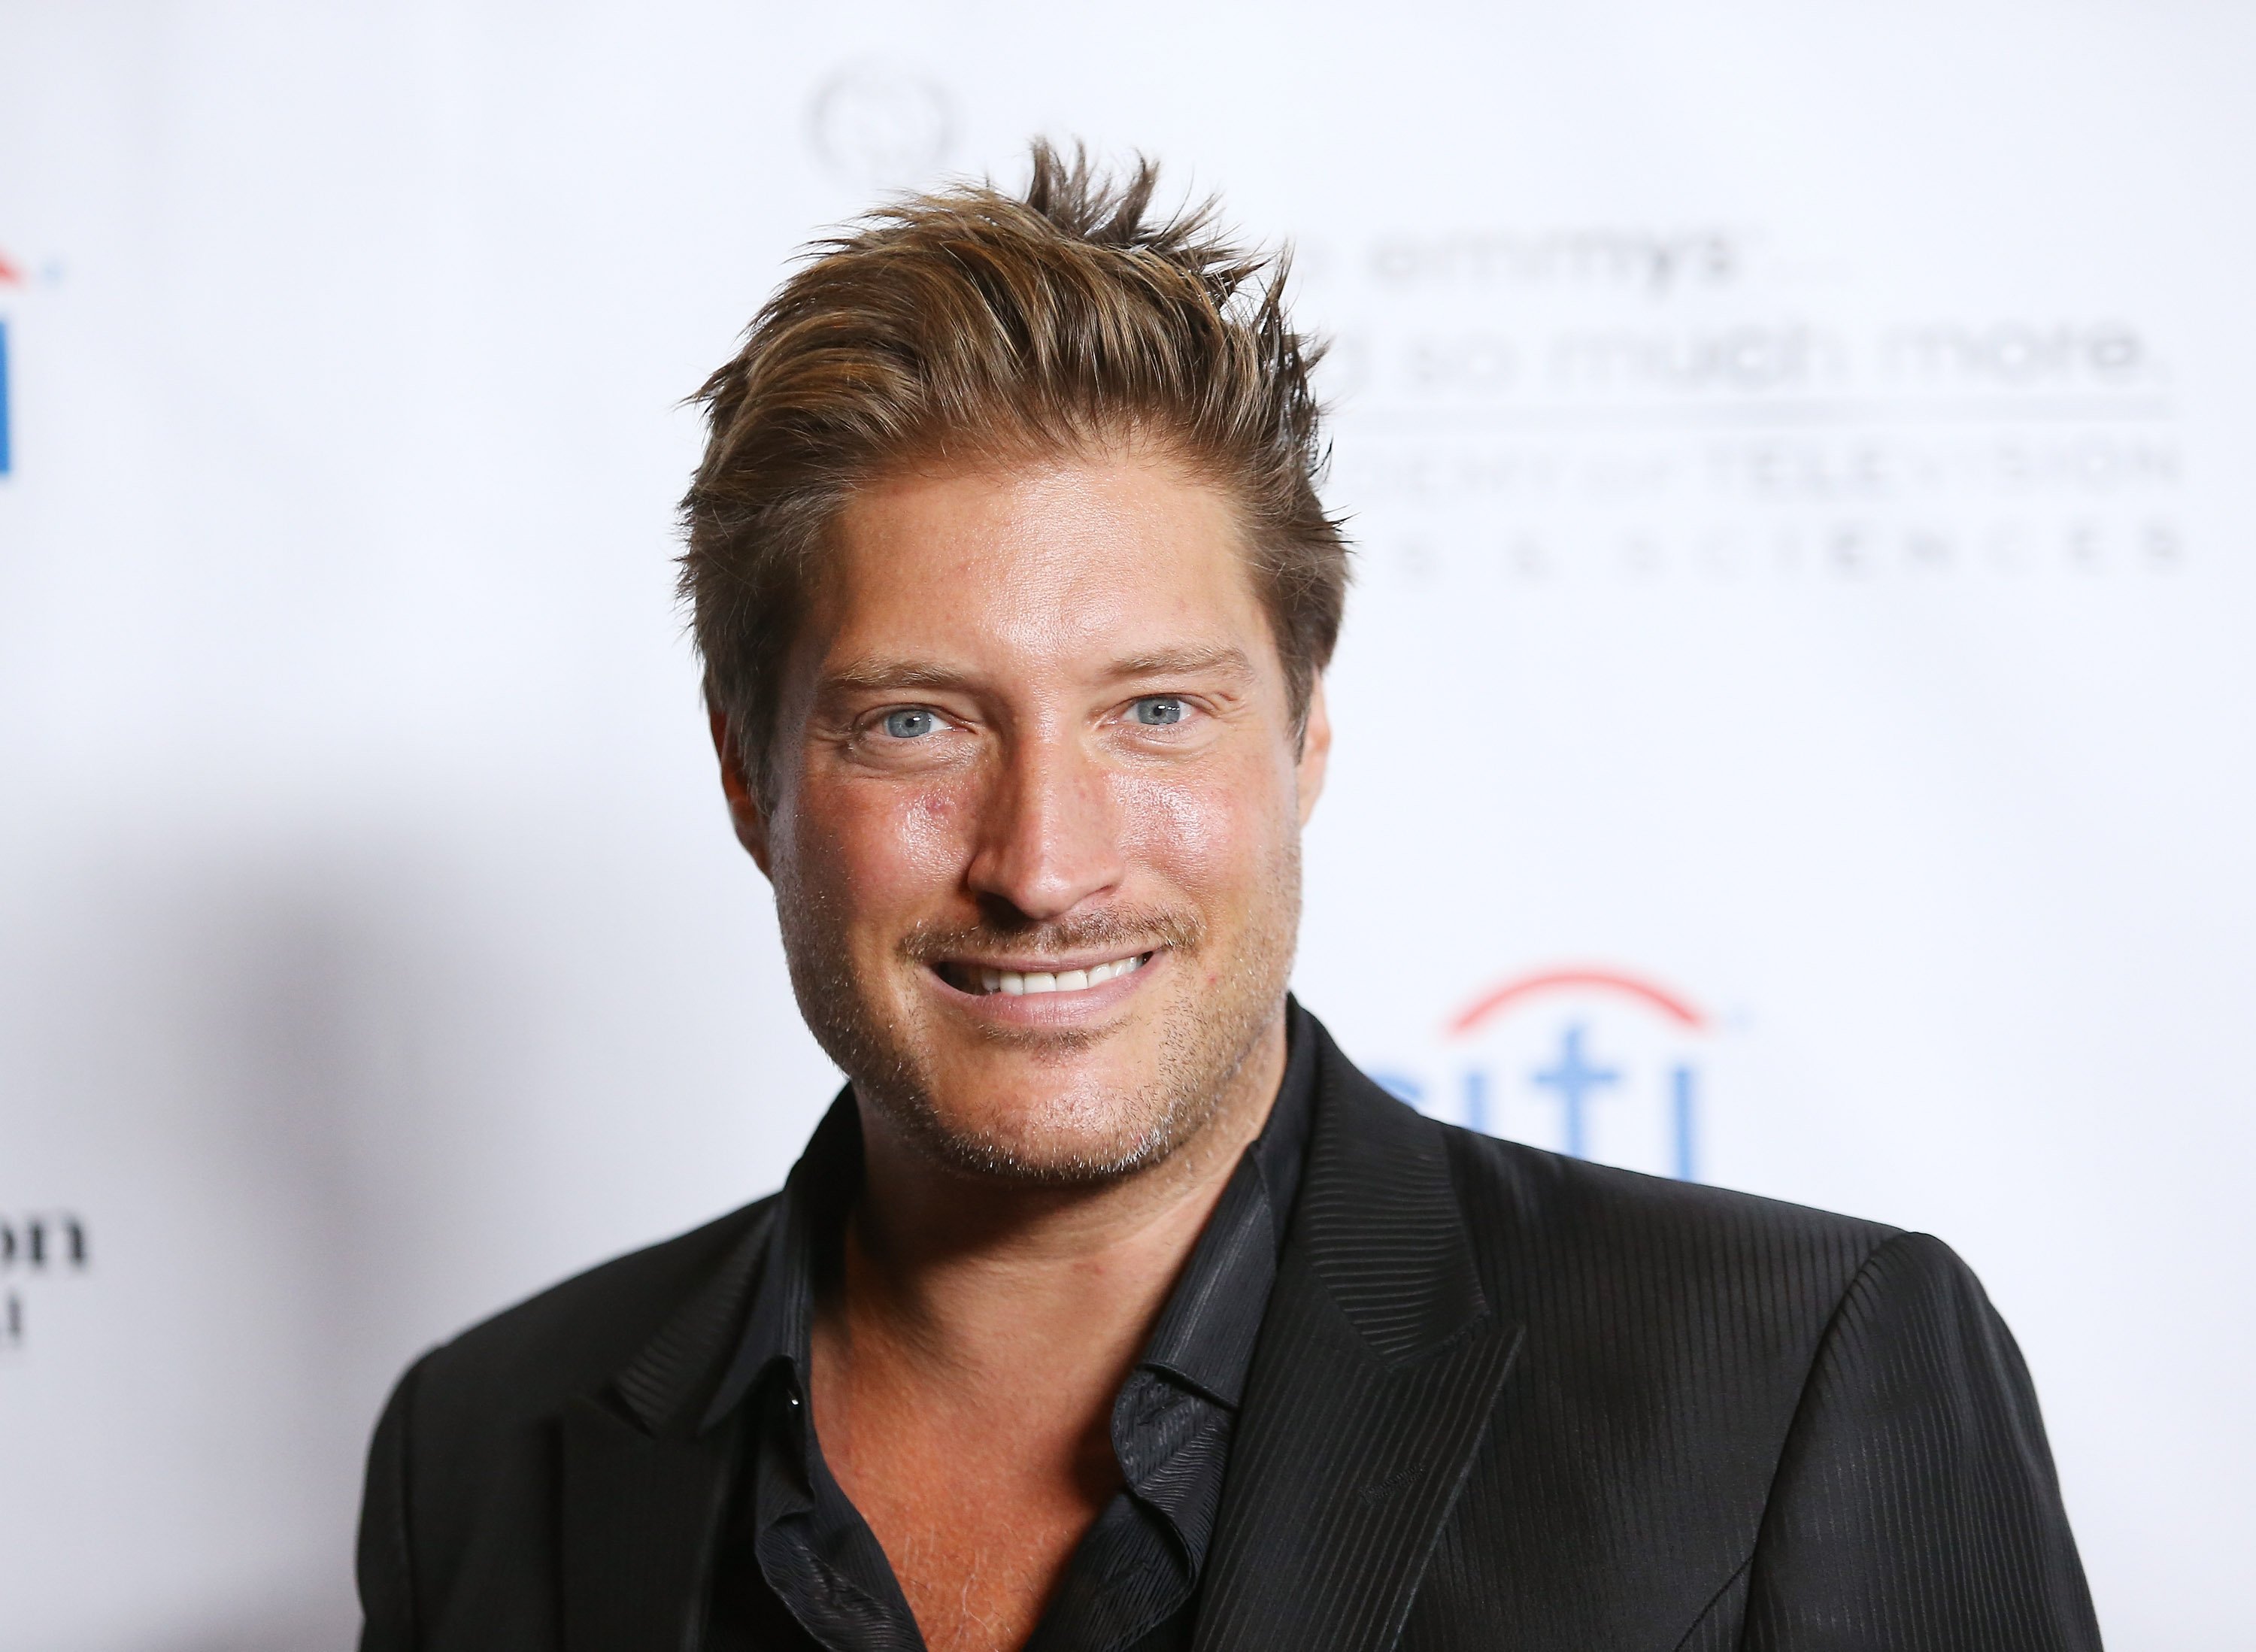 'The Bold and the Beautiful' star Sean Kanan at the 2013 Television of Arts & Science Performers Peer Group cocktail reception.